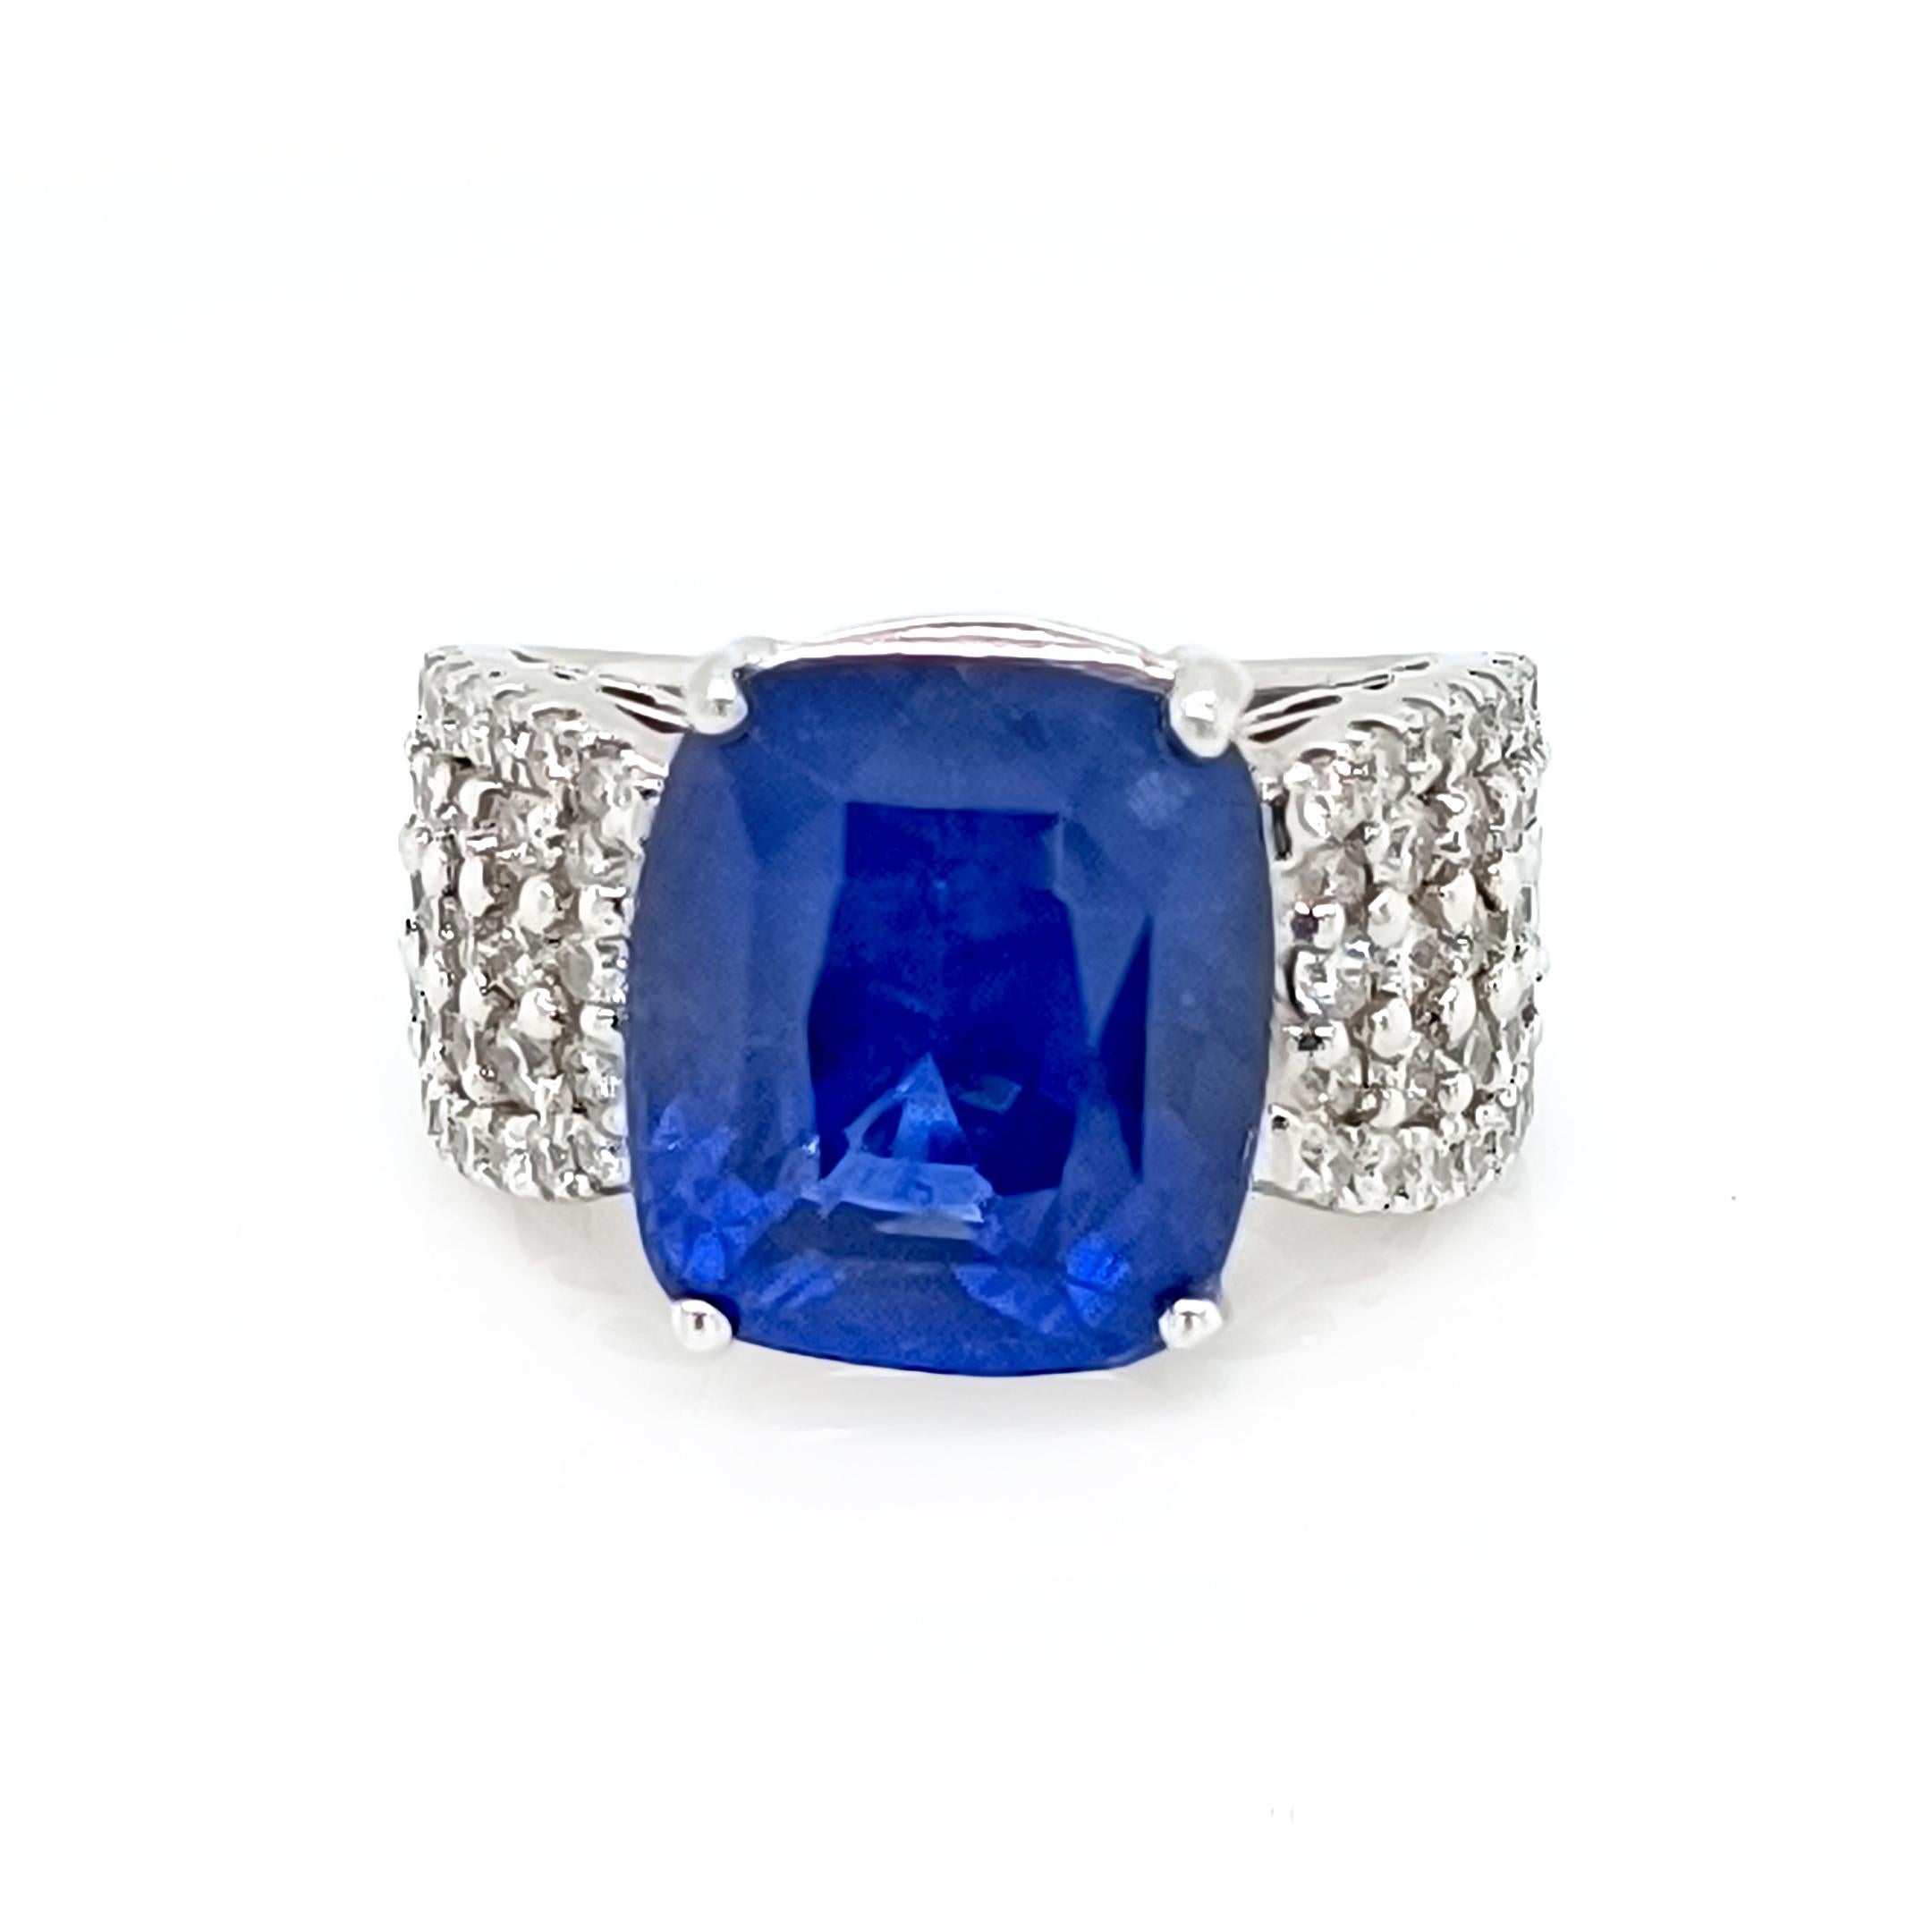 Sapphire 14.16 Cts shouldered by diamonds 1.45 Cts

Set in 14K white gold, 8.00 Gram